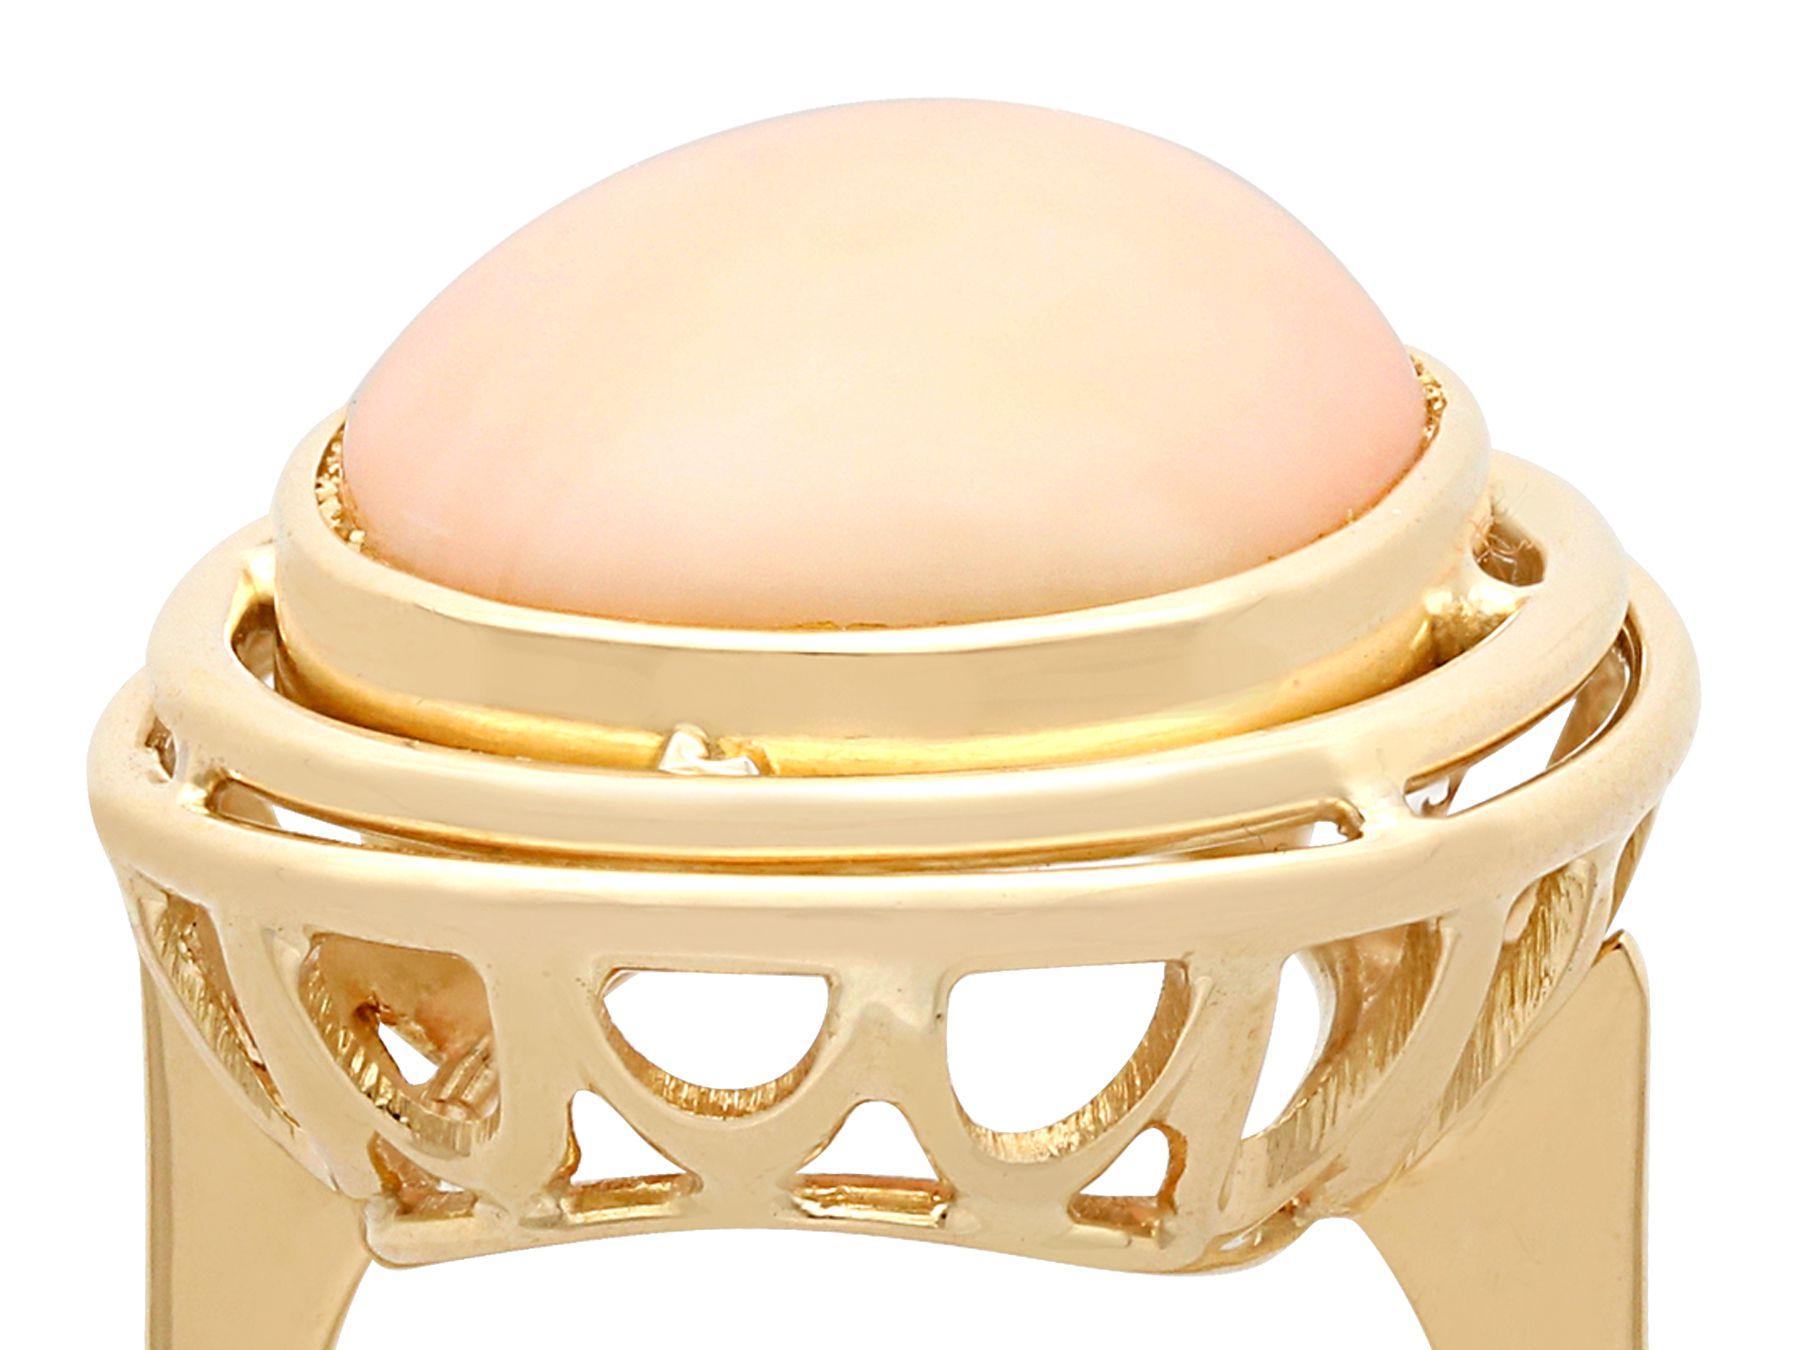 A stunning, fine and impressive vintage 13.98 carat coral and 14 karat yellow gold cocktail ring; part of our diverse vintage jewelry and estate jewelry collections.

This stunning, fine and impressive cabochon cut coral vintage ring has been